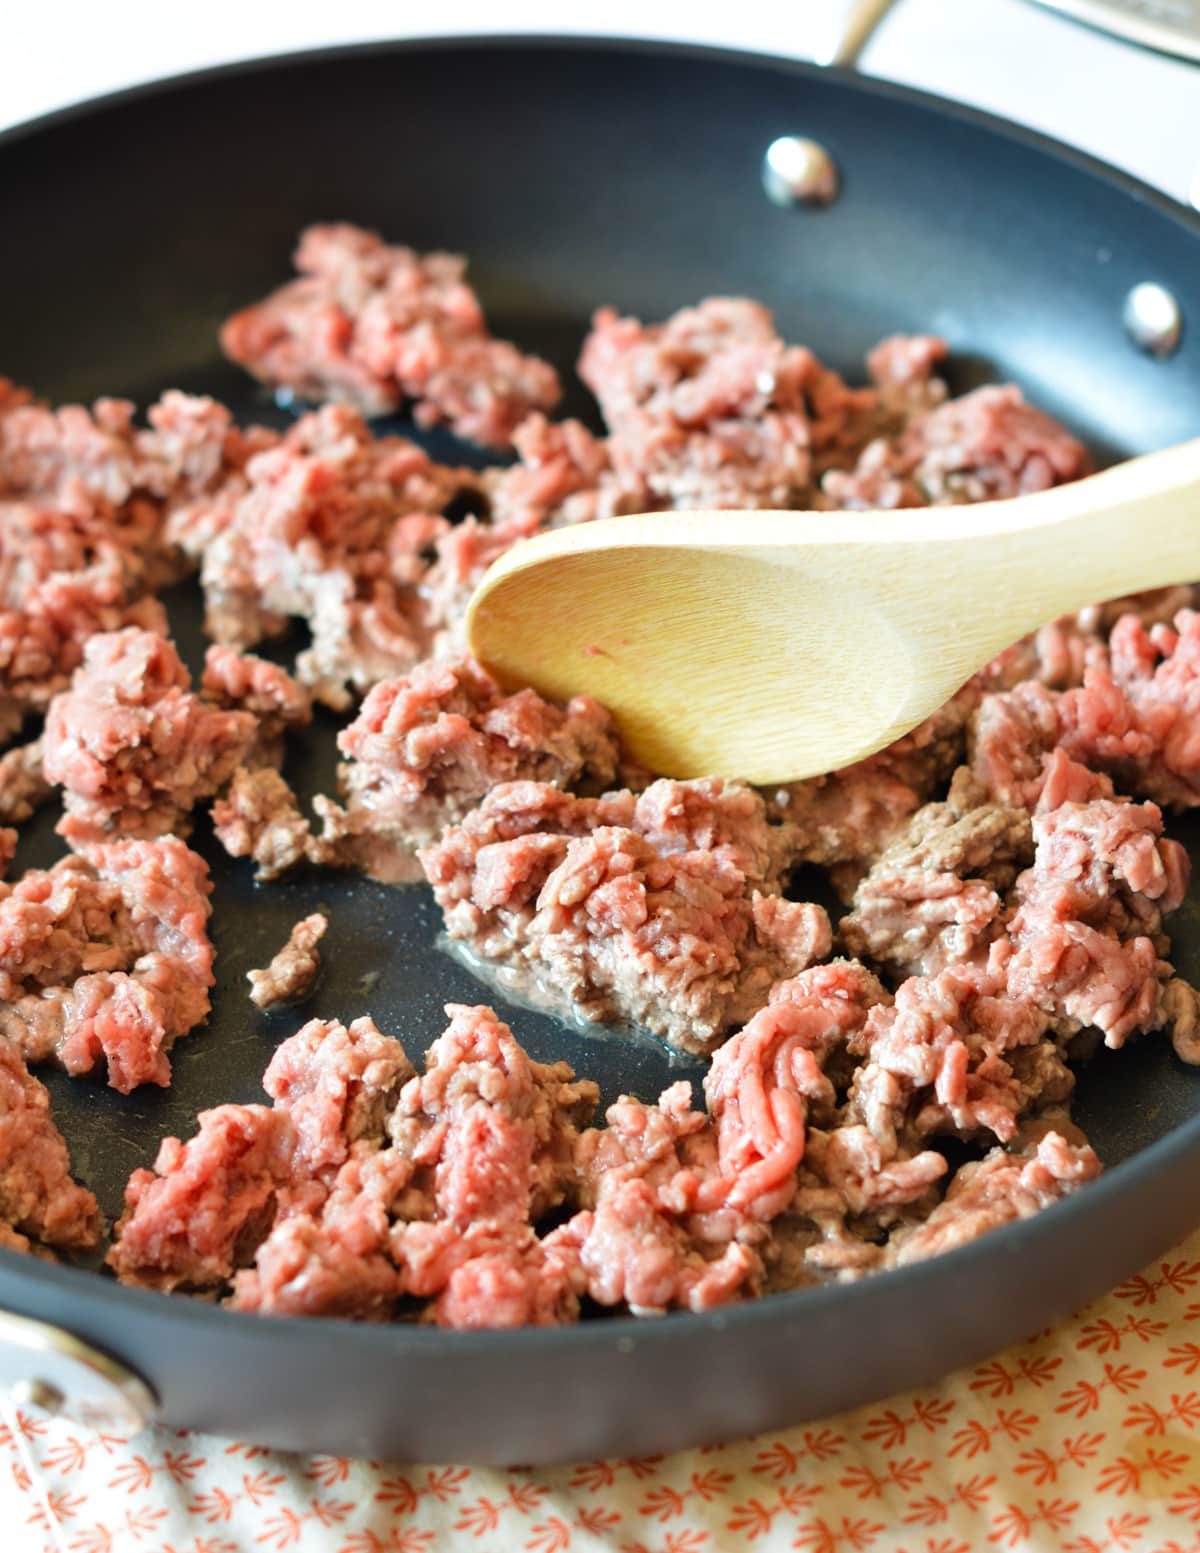 cooking ground beef in a skillet.